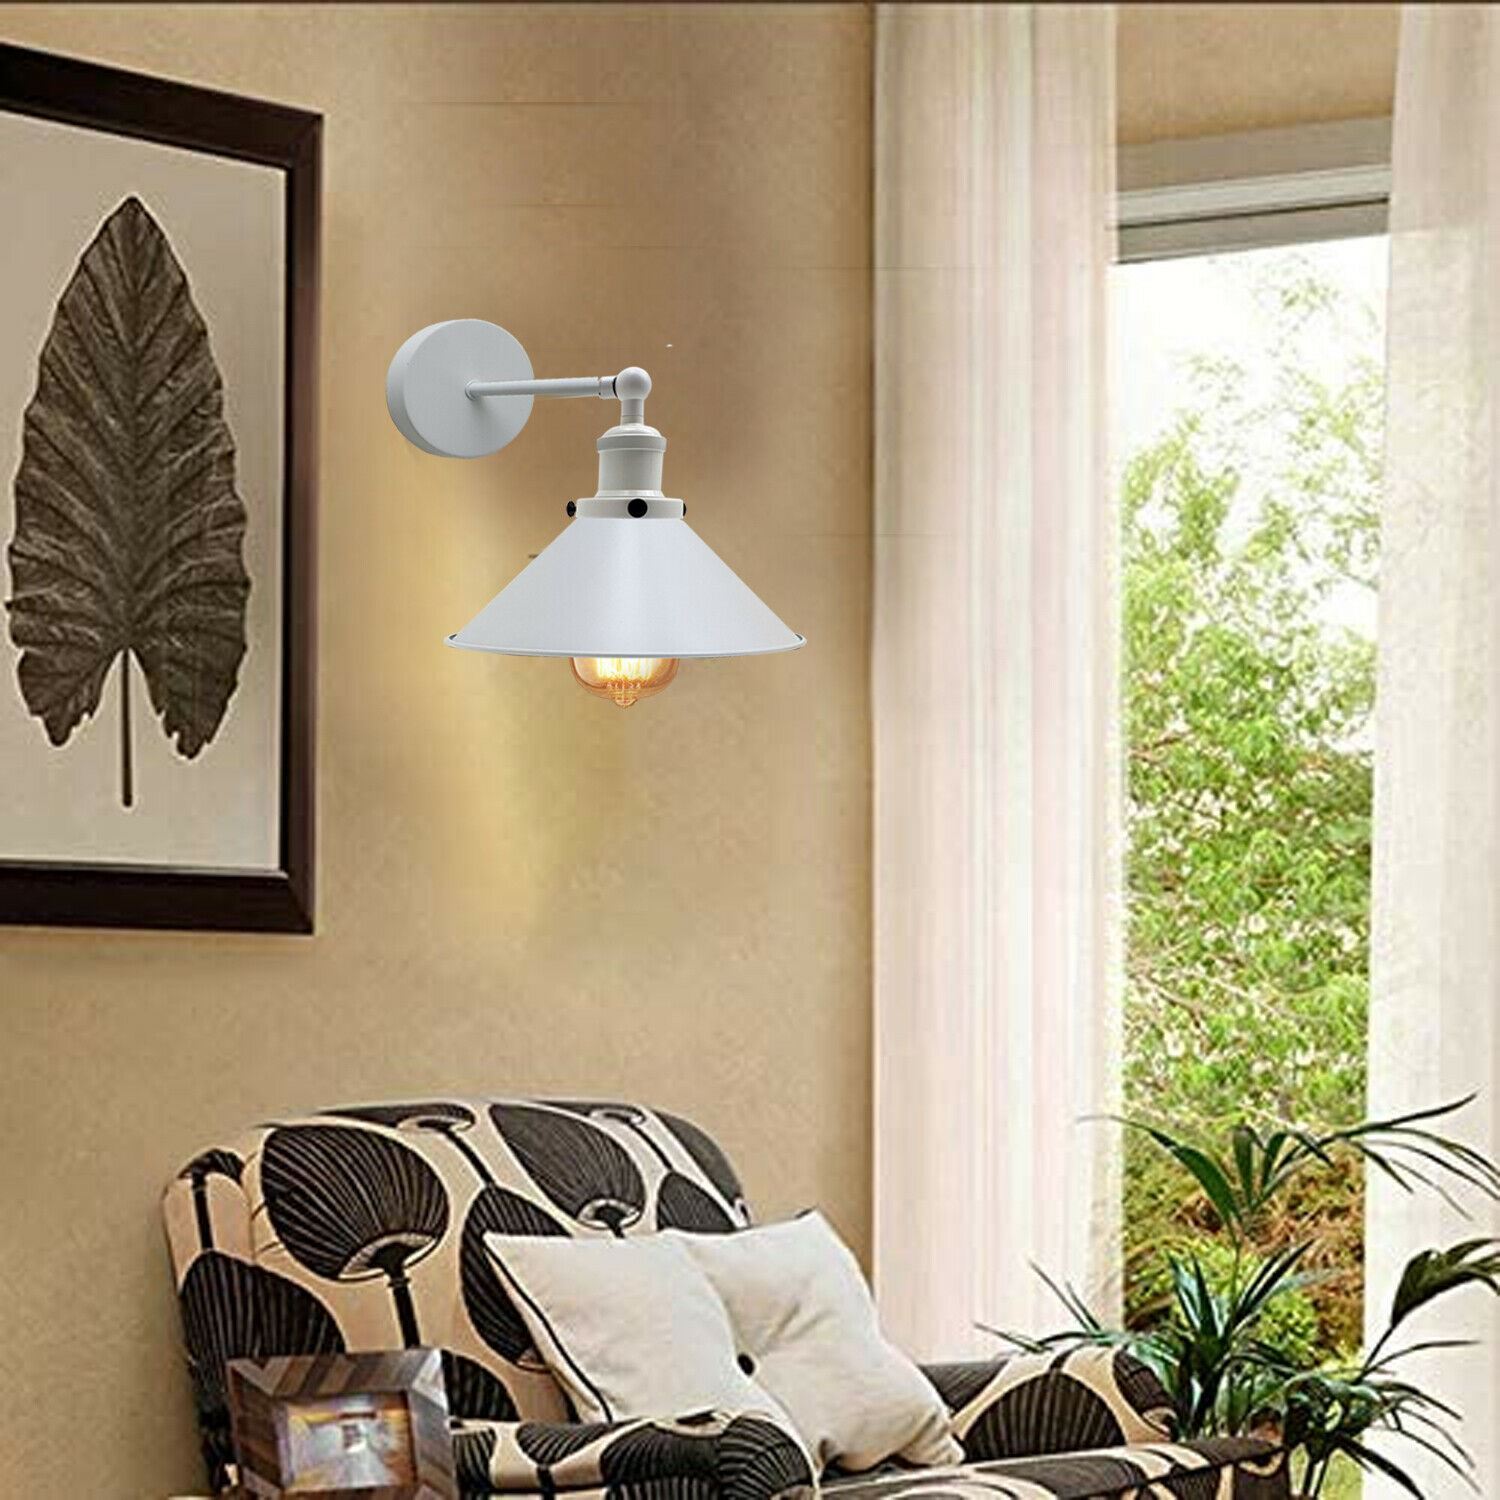 Modern Style E27 Wall Light: Plug-in Lamp for Coffee Bars Application Image 2